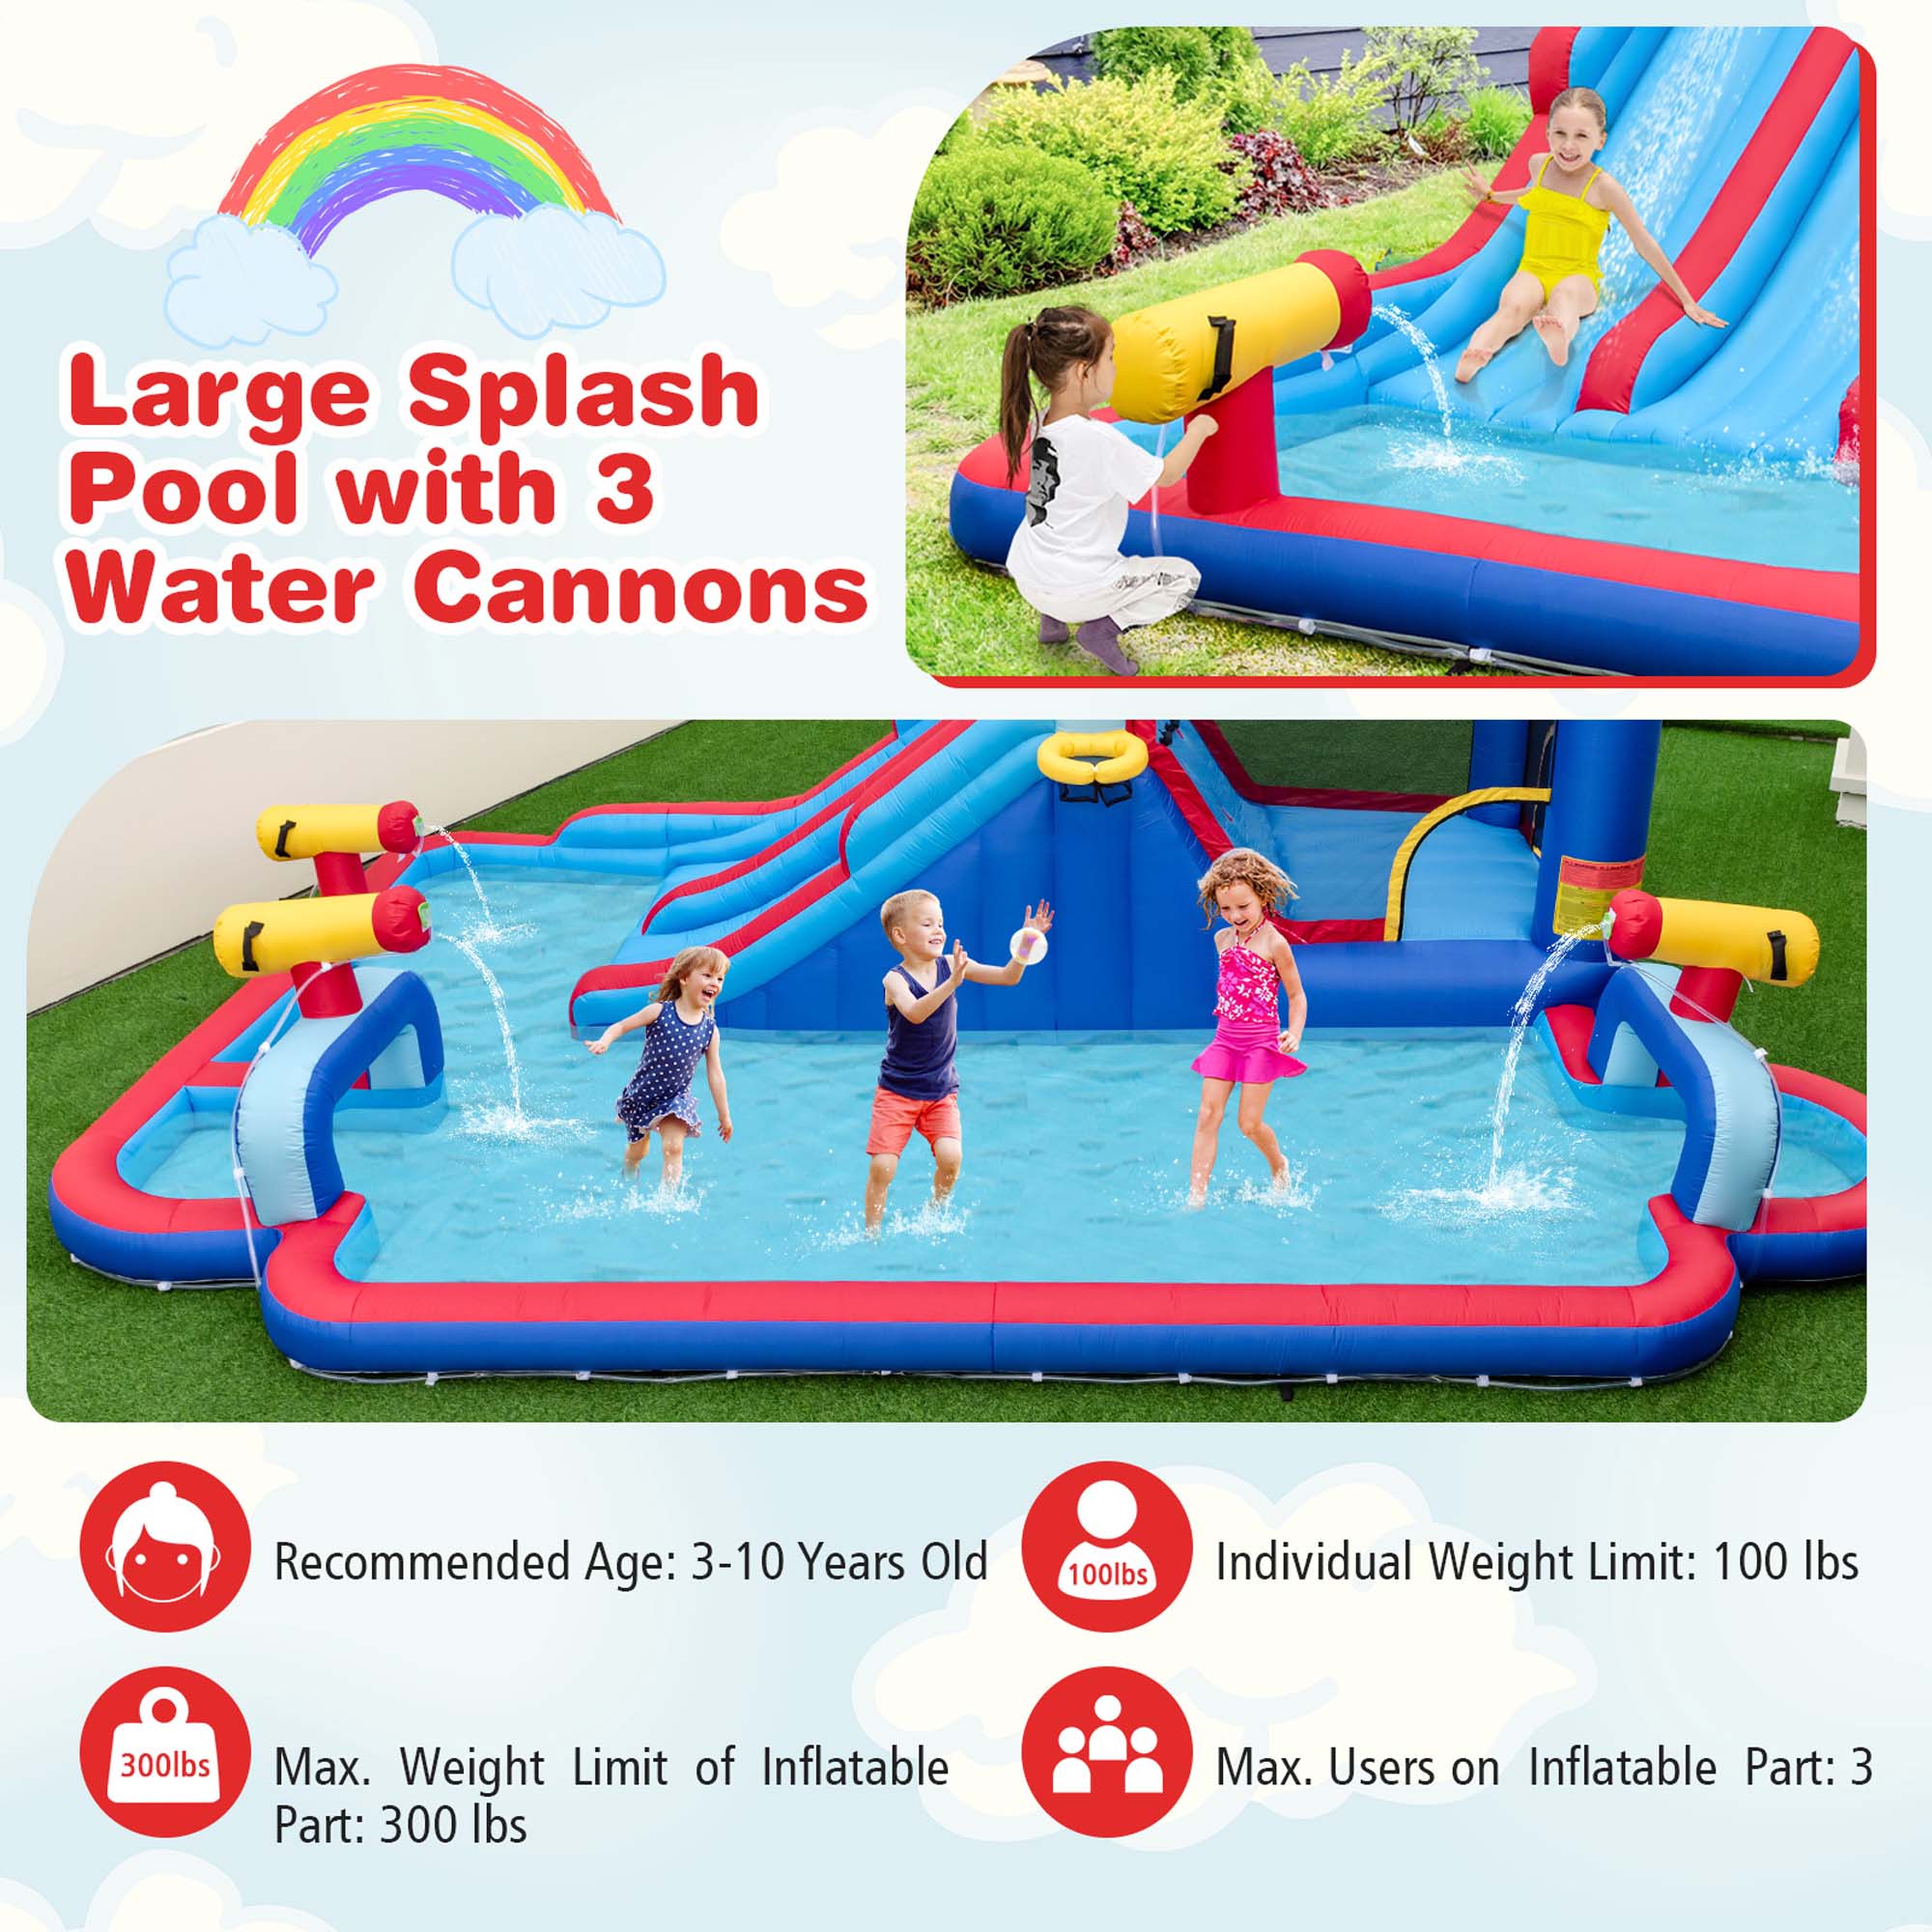 Costway Inflatable Water Slide Park Kids Bounce House Climbing Jumping with 750W Blower